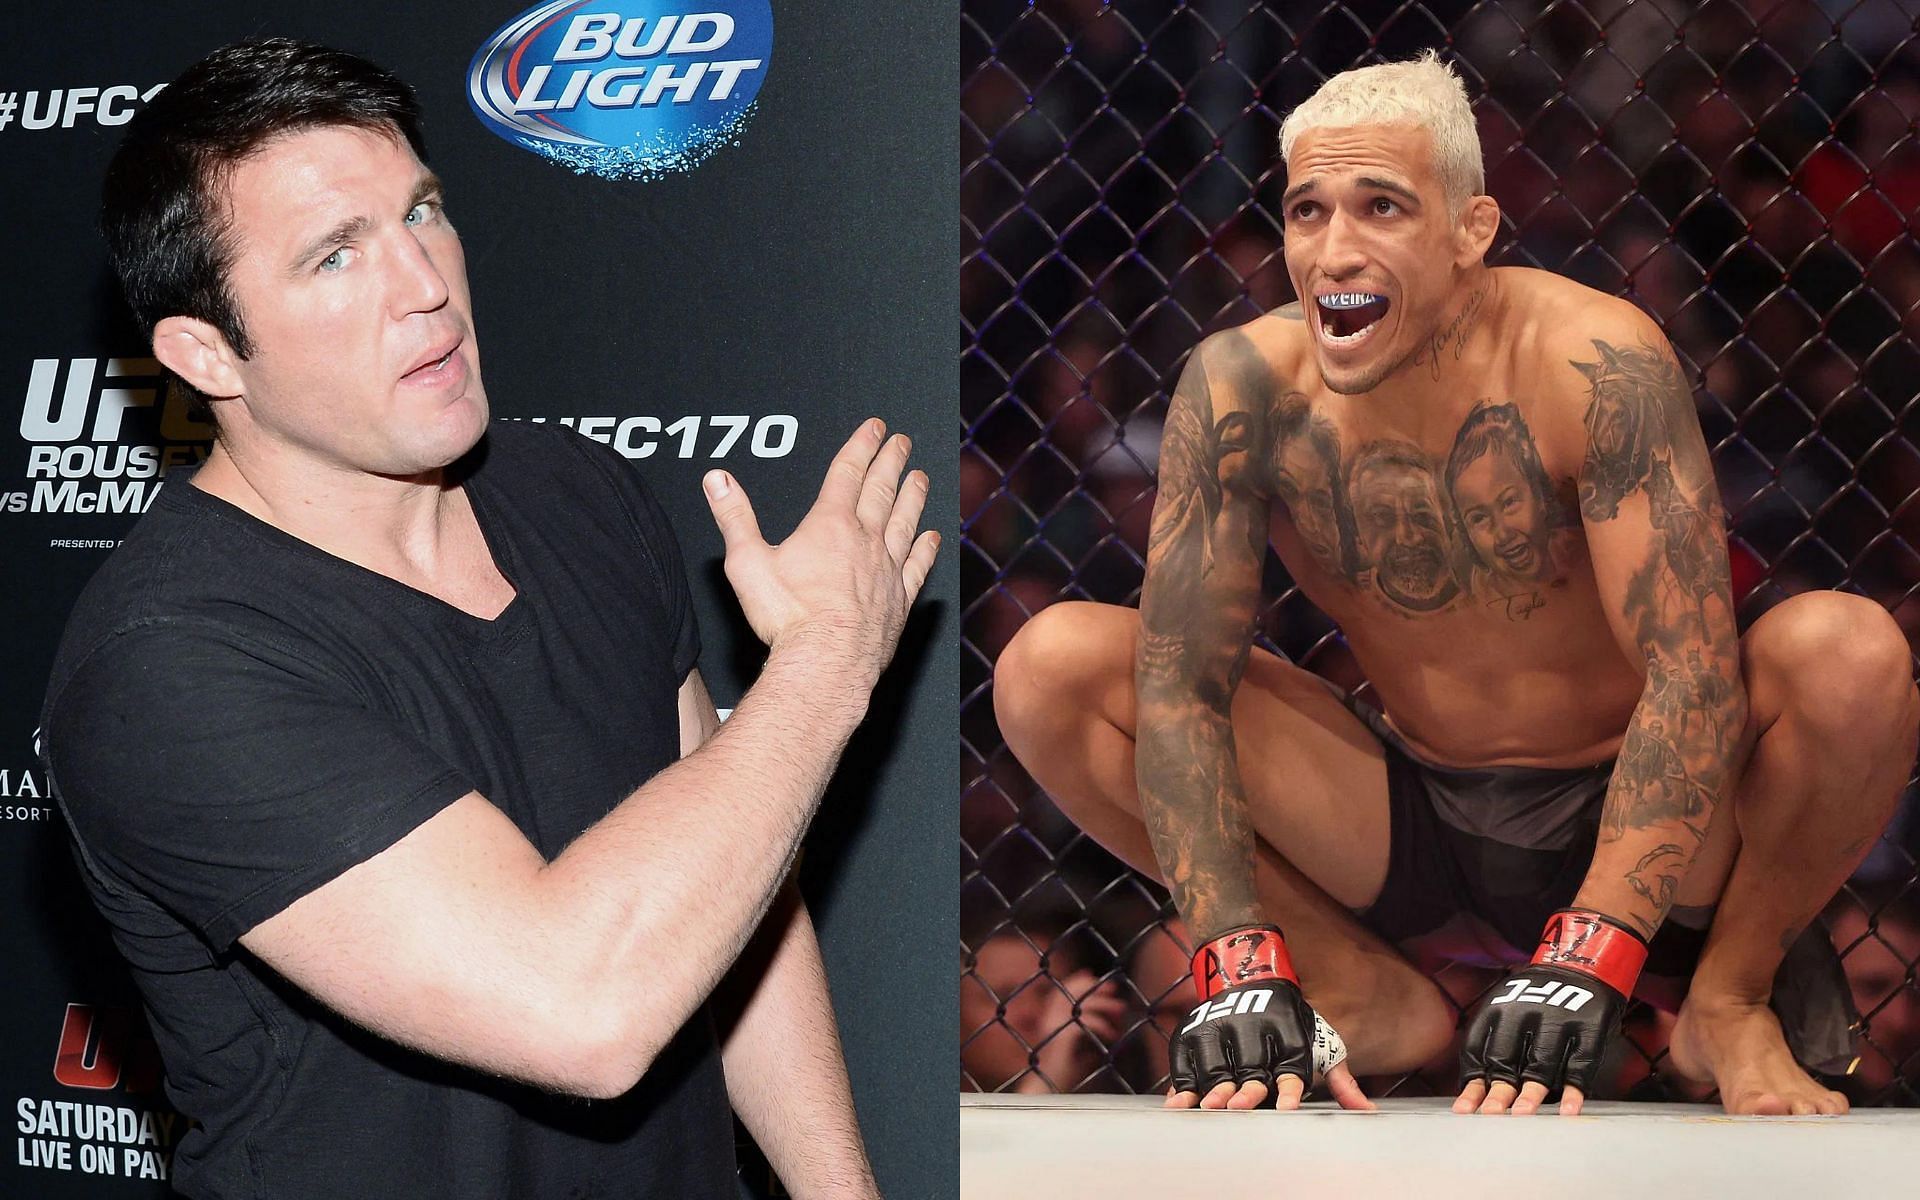 Chael Sonnen (left) and Charles Oliveira (right) (Images courtesy of Getty)